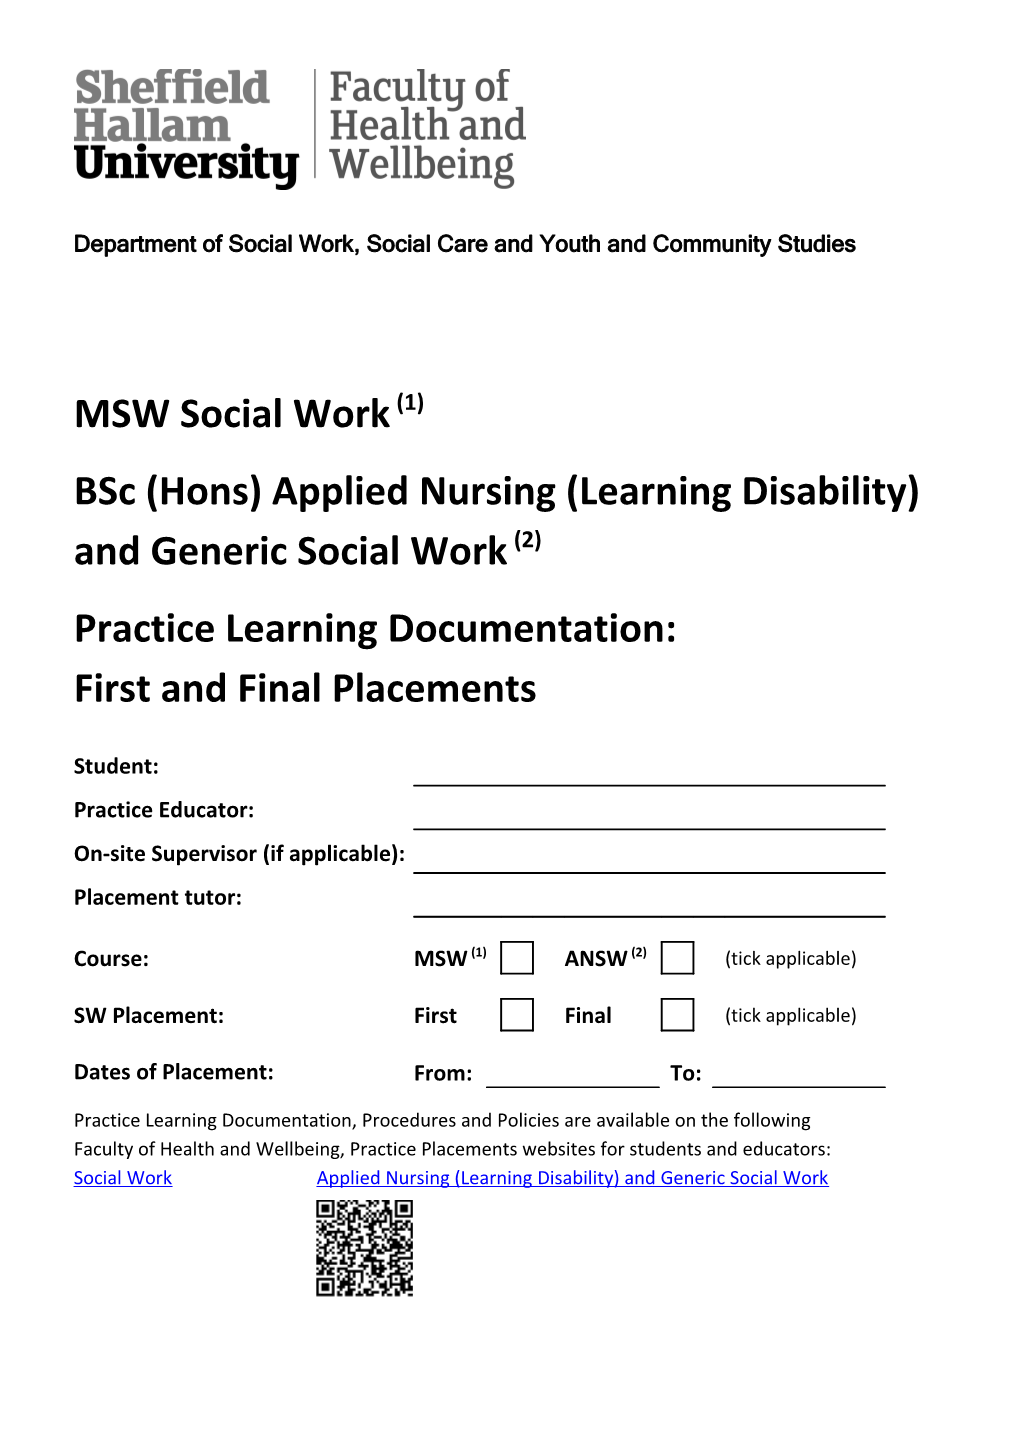 Department of Social Work, Social Care and Youth and Community Studies